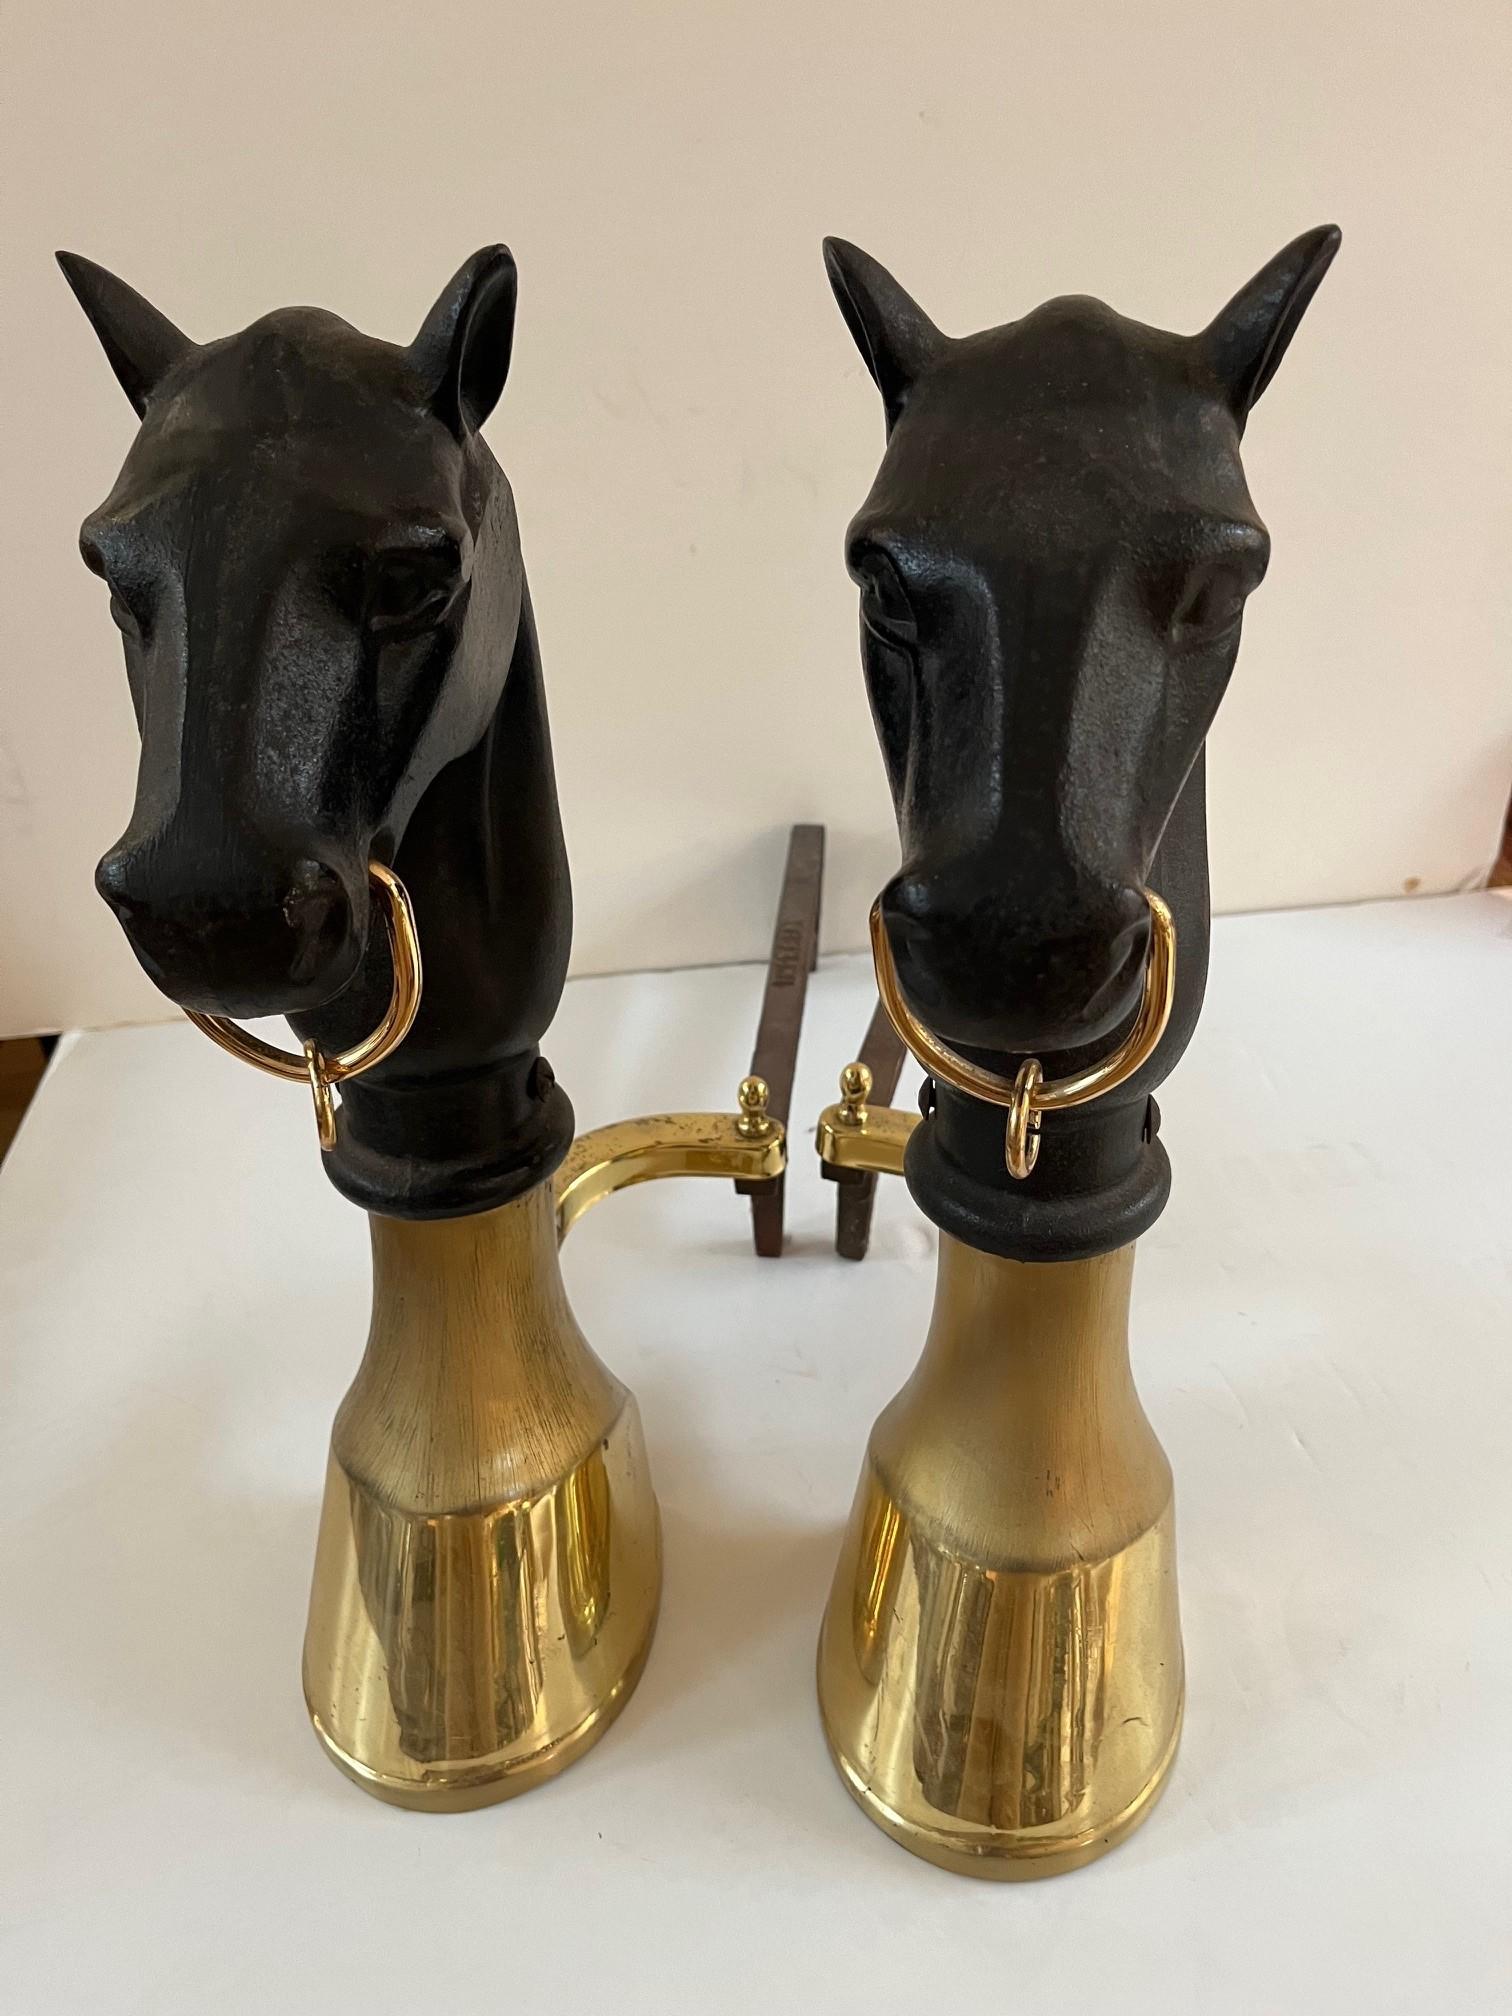 Pair of Vintage English Equestrian Brass and cast-Iron Horse Heads Andirons and Hoof Andiron Supported by Bronze Hoof Base